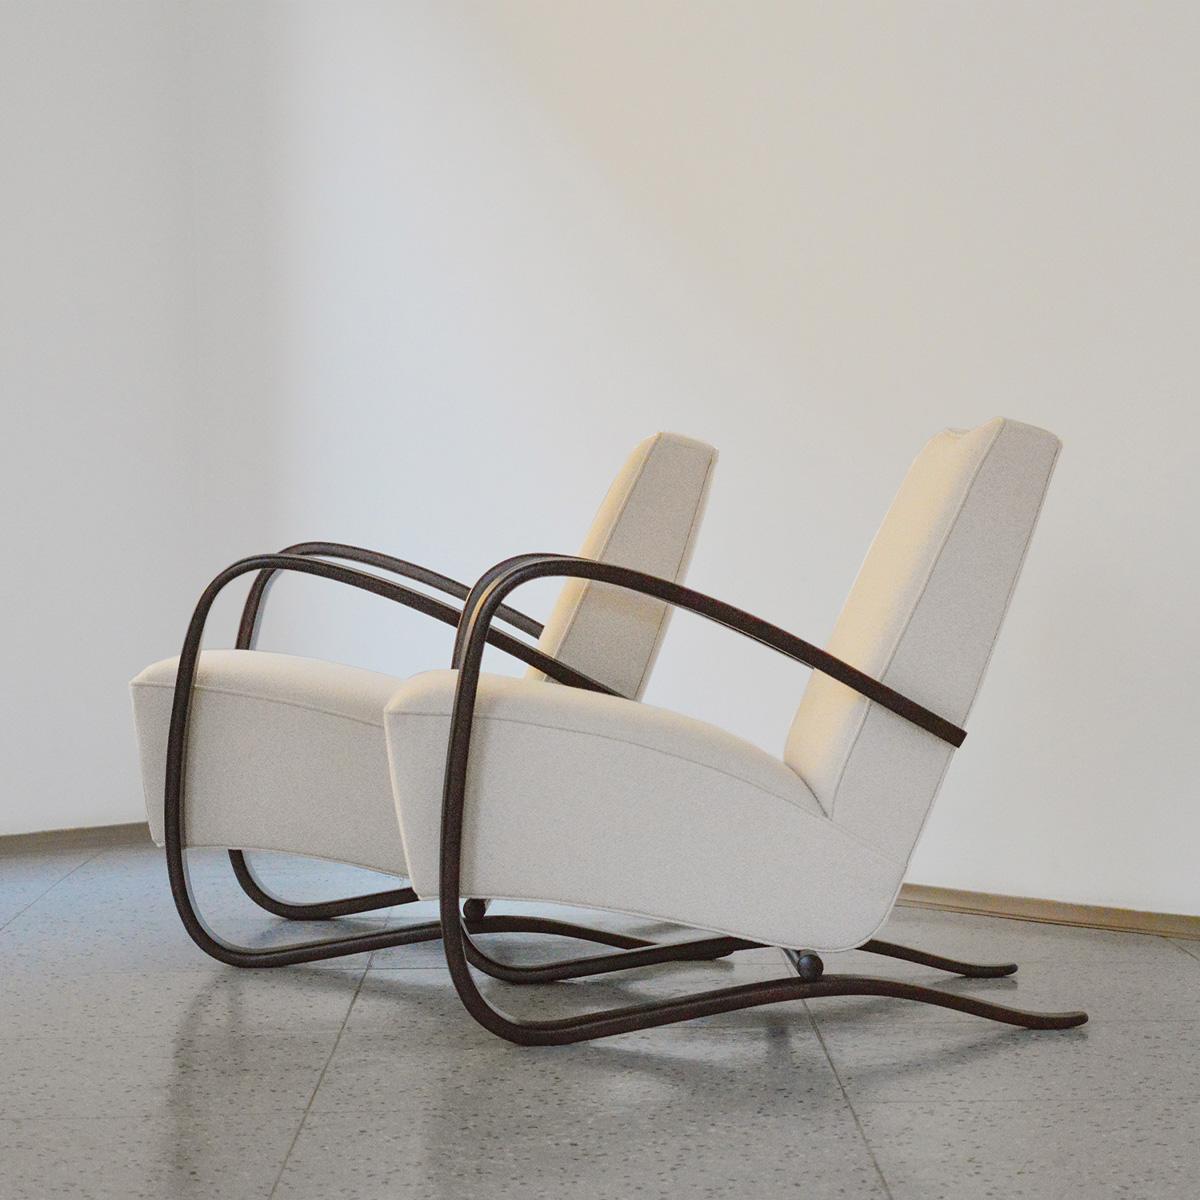 Pair of lounge chairs in wood and fabric, model H-269, designed by Jindrich Halabala and manufactured by UP Závody in former Czechoslovakia, 1930s.

Perhaps one of the most well-known lounge chair models by the renowned Czech designer, the H-269